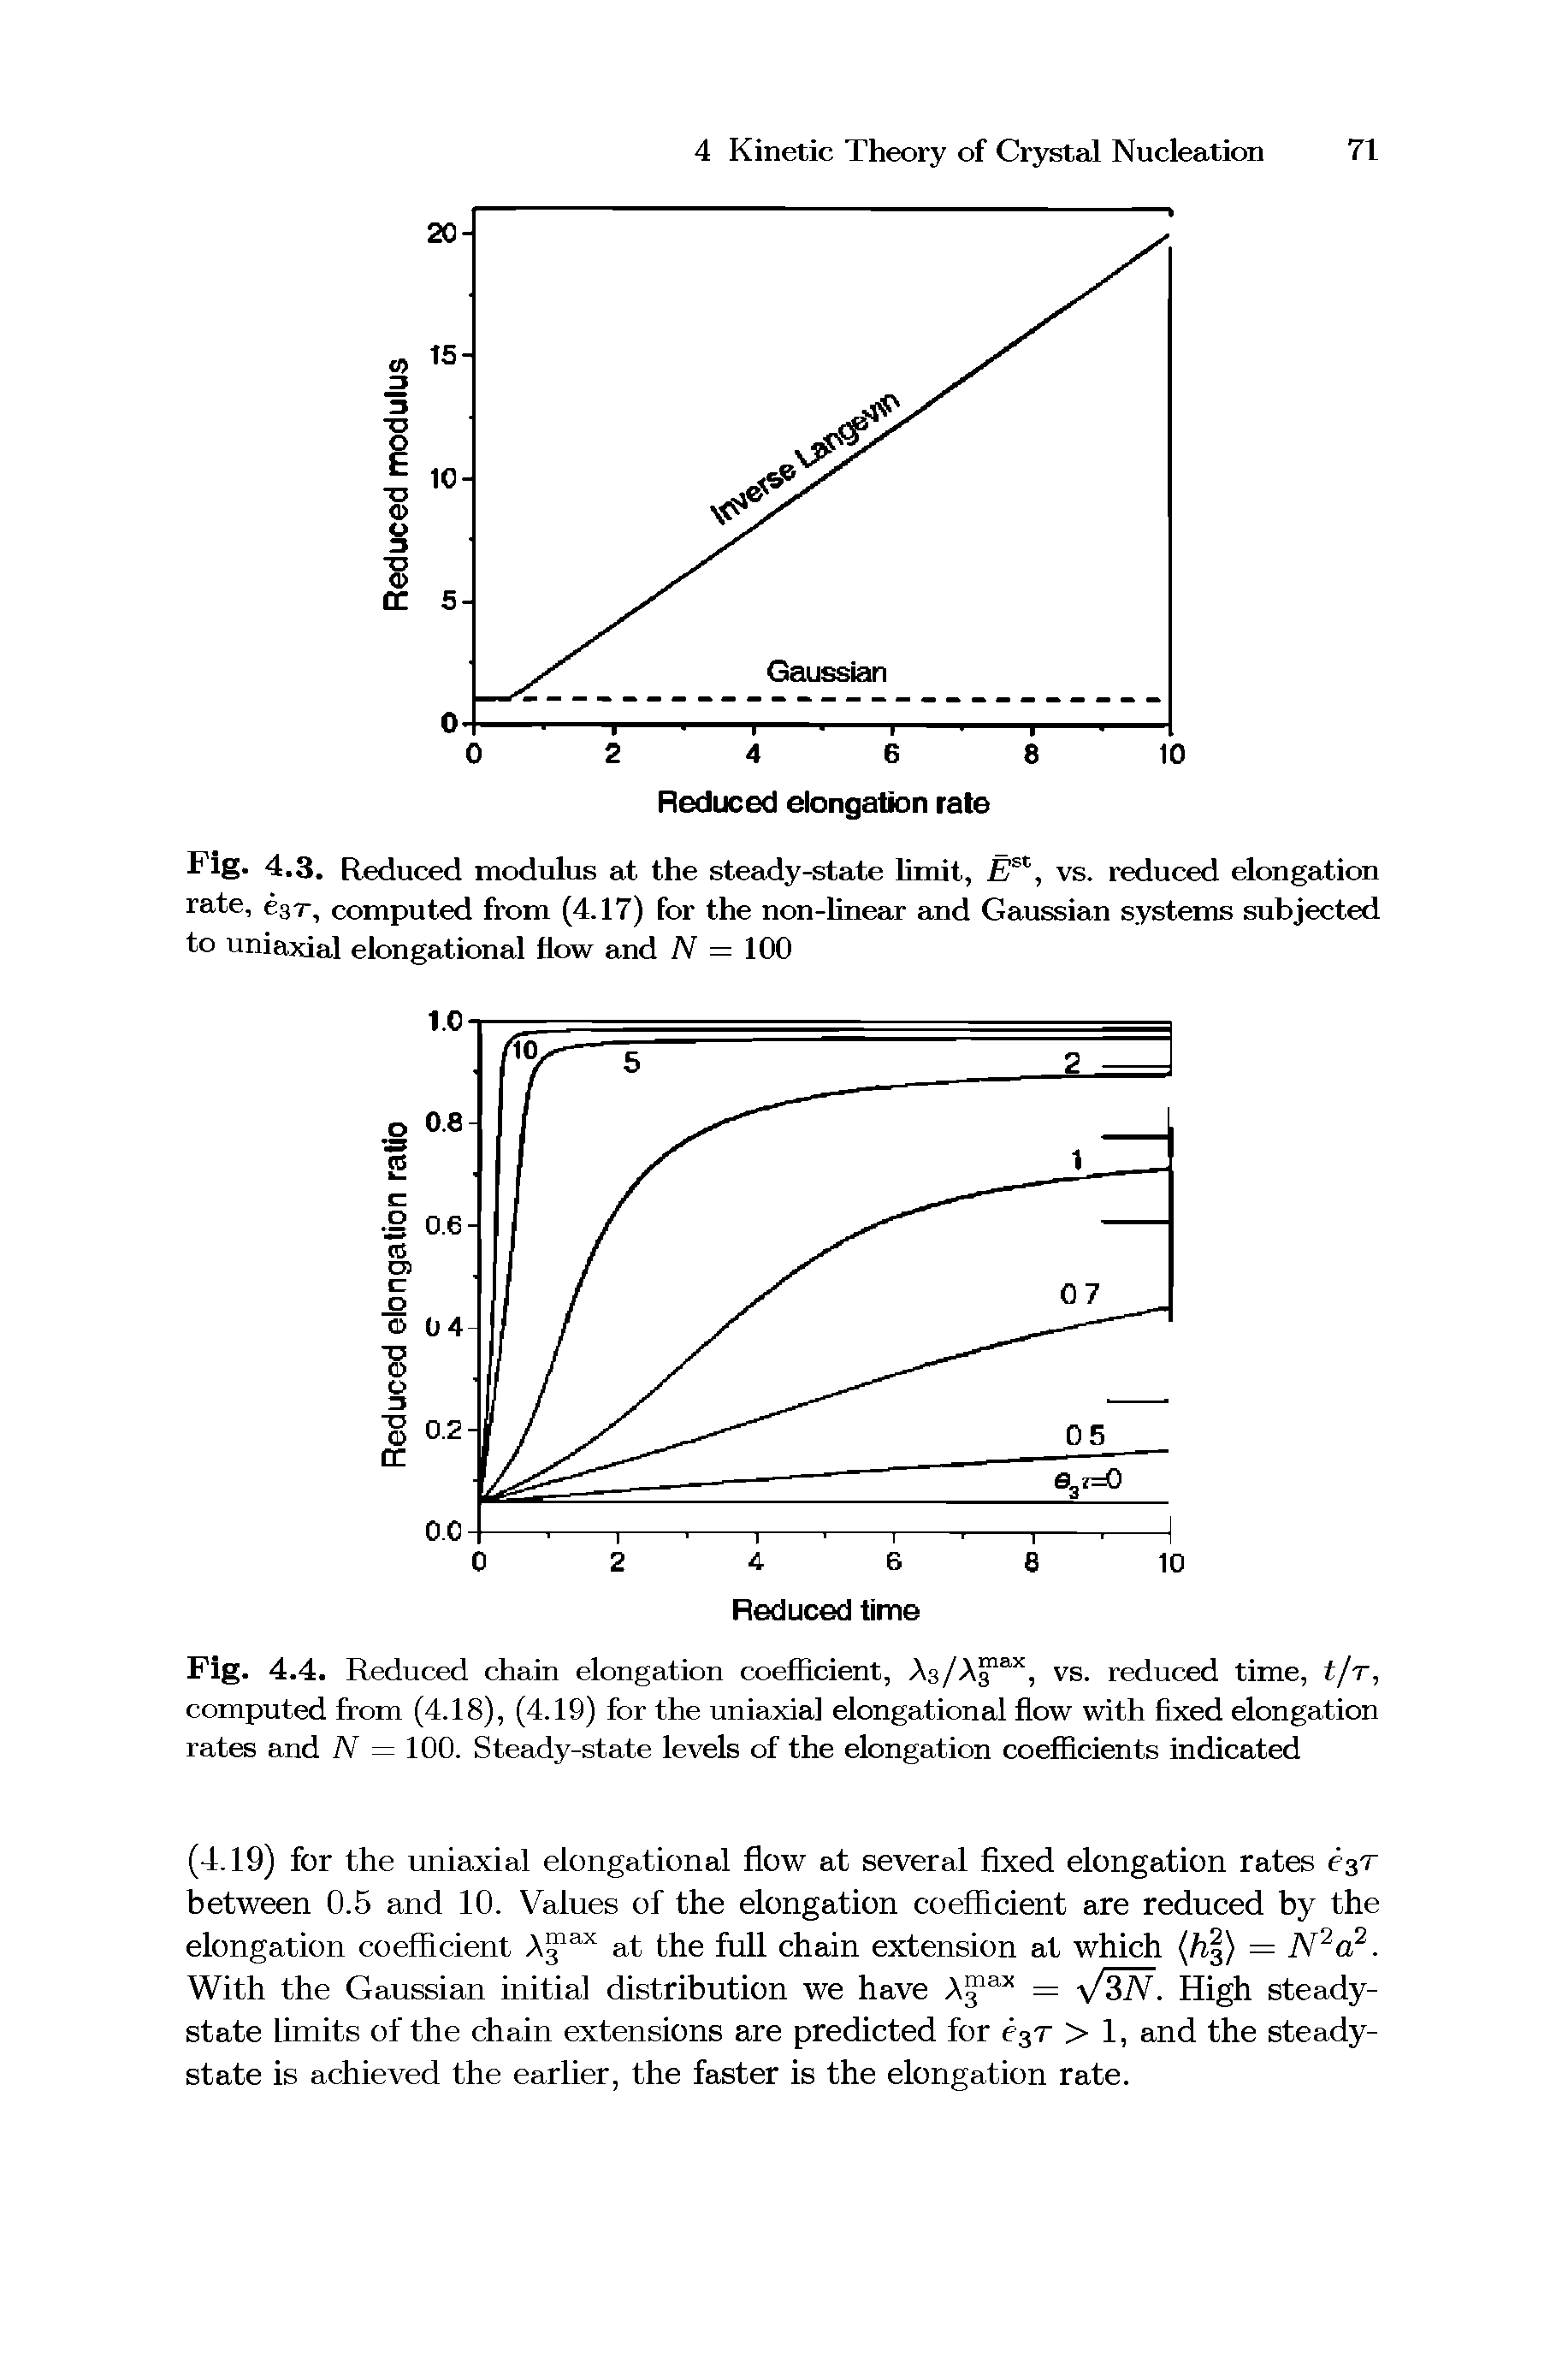 Fig. 4.4. Reduced chain elongation coefficient, Xs/X s, vs. reduced time, t/r, computed from (4.18), (4.19) for the uniaxial elongational flow with fixed elongation rates and A = 100. Steady-state levels of the elongation coefficients indicated...